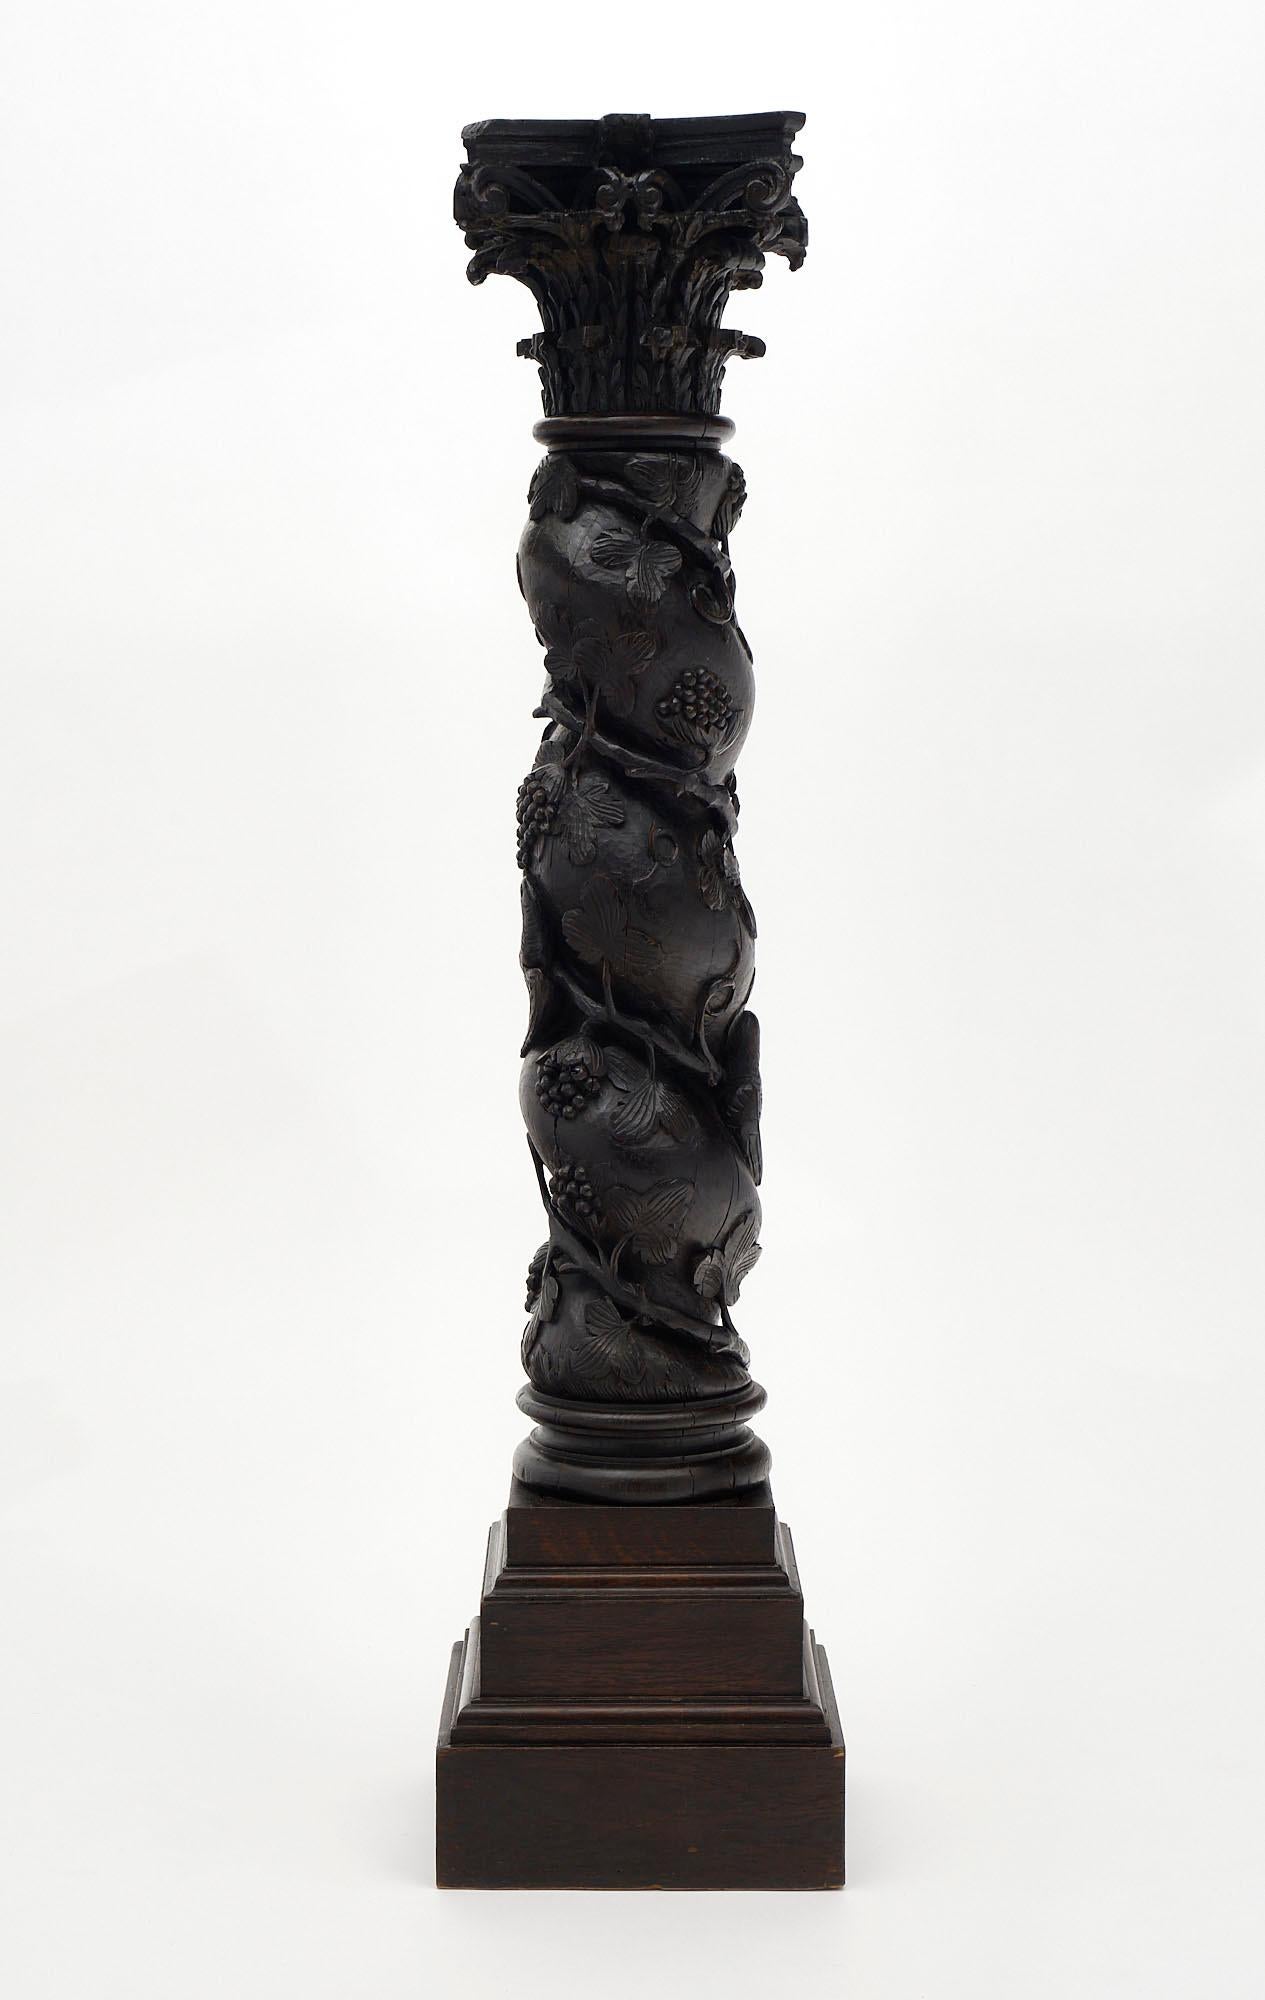 Column from 17th century France made of beautiful hand-carved and sculpted wood with pampre décor throughout and a Corinthian capital. This pedestal piece is in excellent antique condition and boasts a lovely patina to the wood.